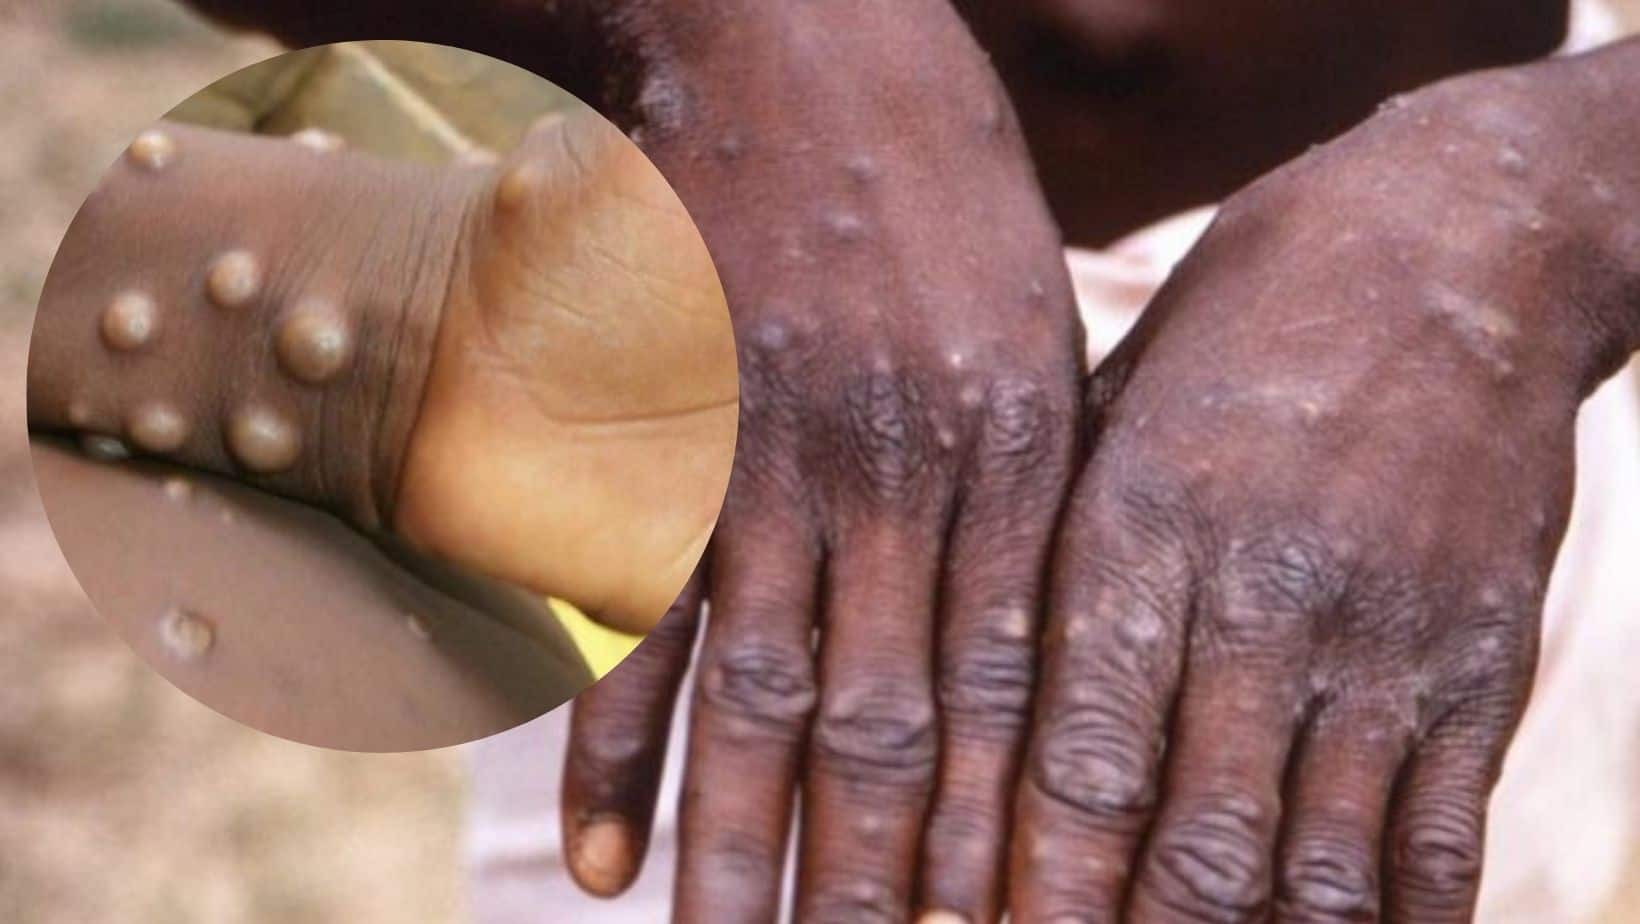 Rare Monkeypox Virus Detected In US For The First Time: How You Can Catch It And Symptoms It Can Cause